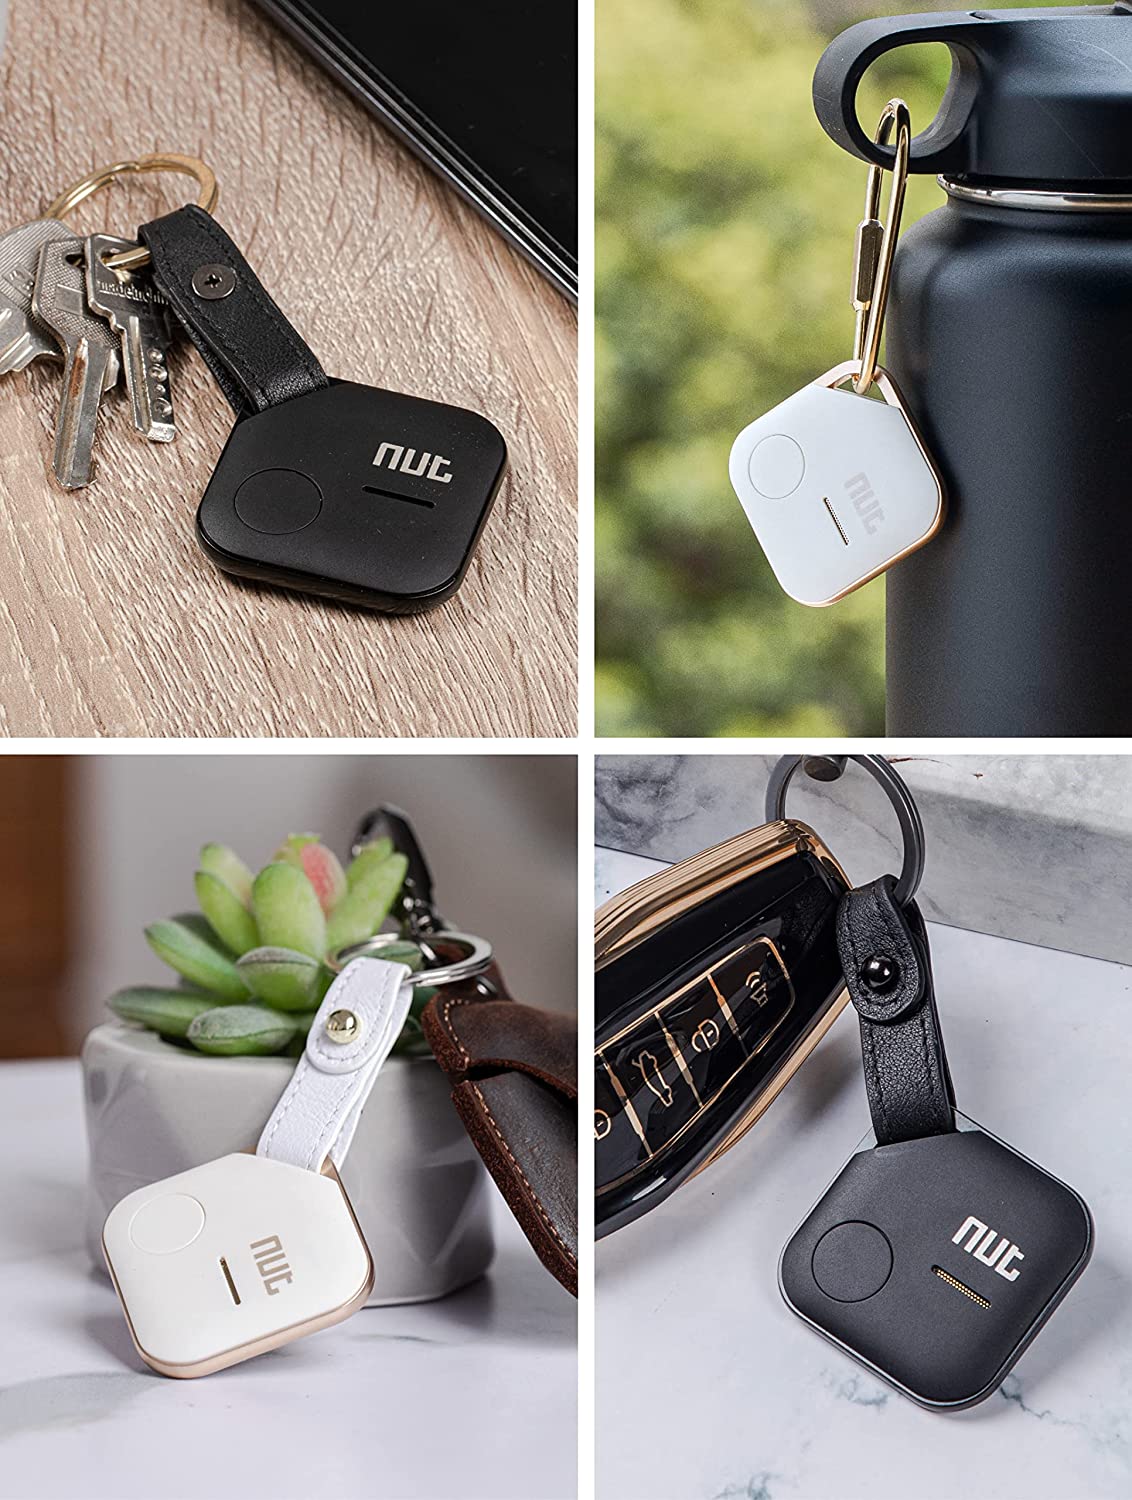 Nutale Key Finder, Bluetooth Tracker Item Locator with Key Chain for Keys Pet Wallets or Backpacks and Tablets, Batteries Include (White & Black, 4 Pack)